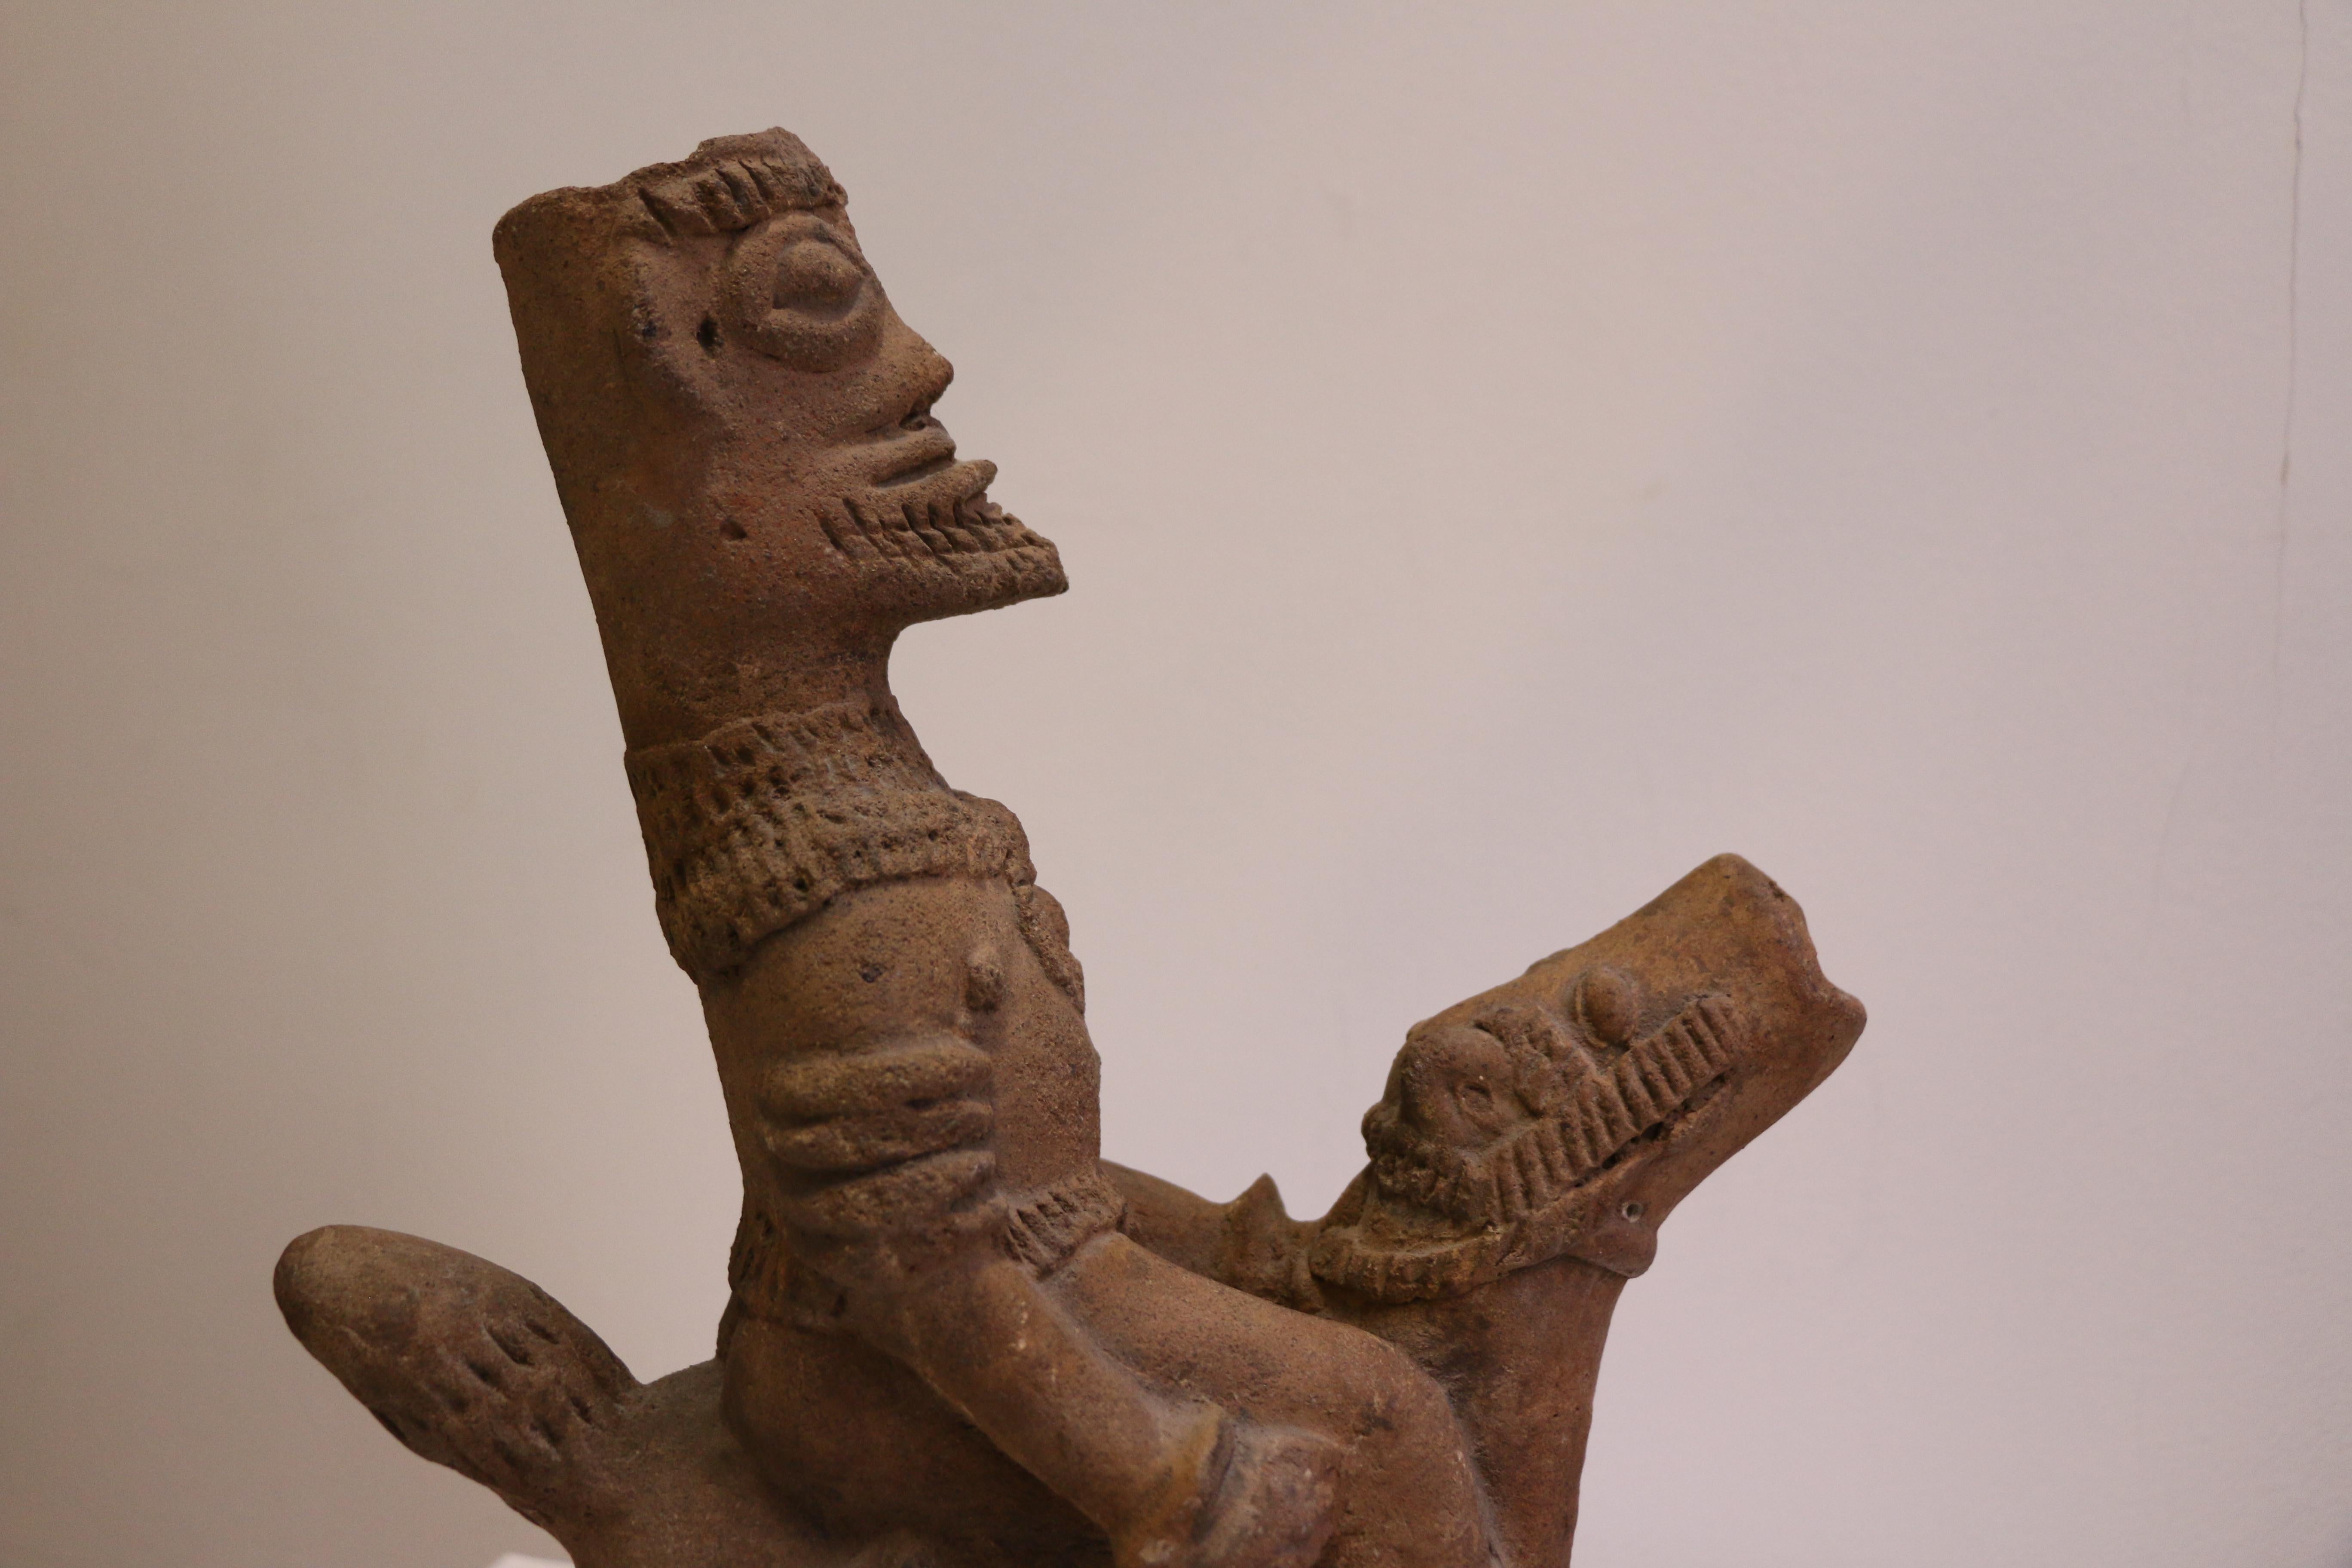 African Terracotta Equestrian Sculpture, Ghana, 14-15th AD Century For Sale 3